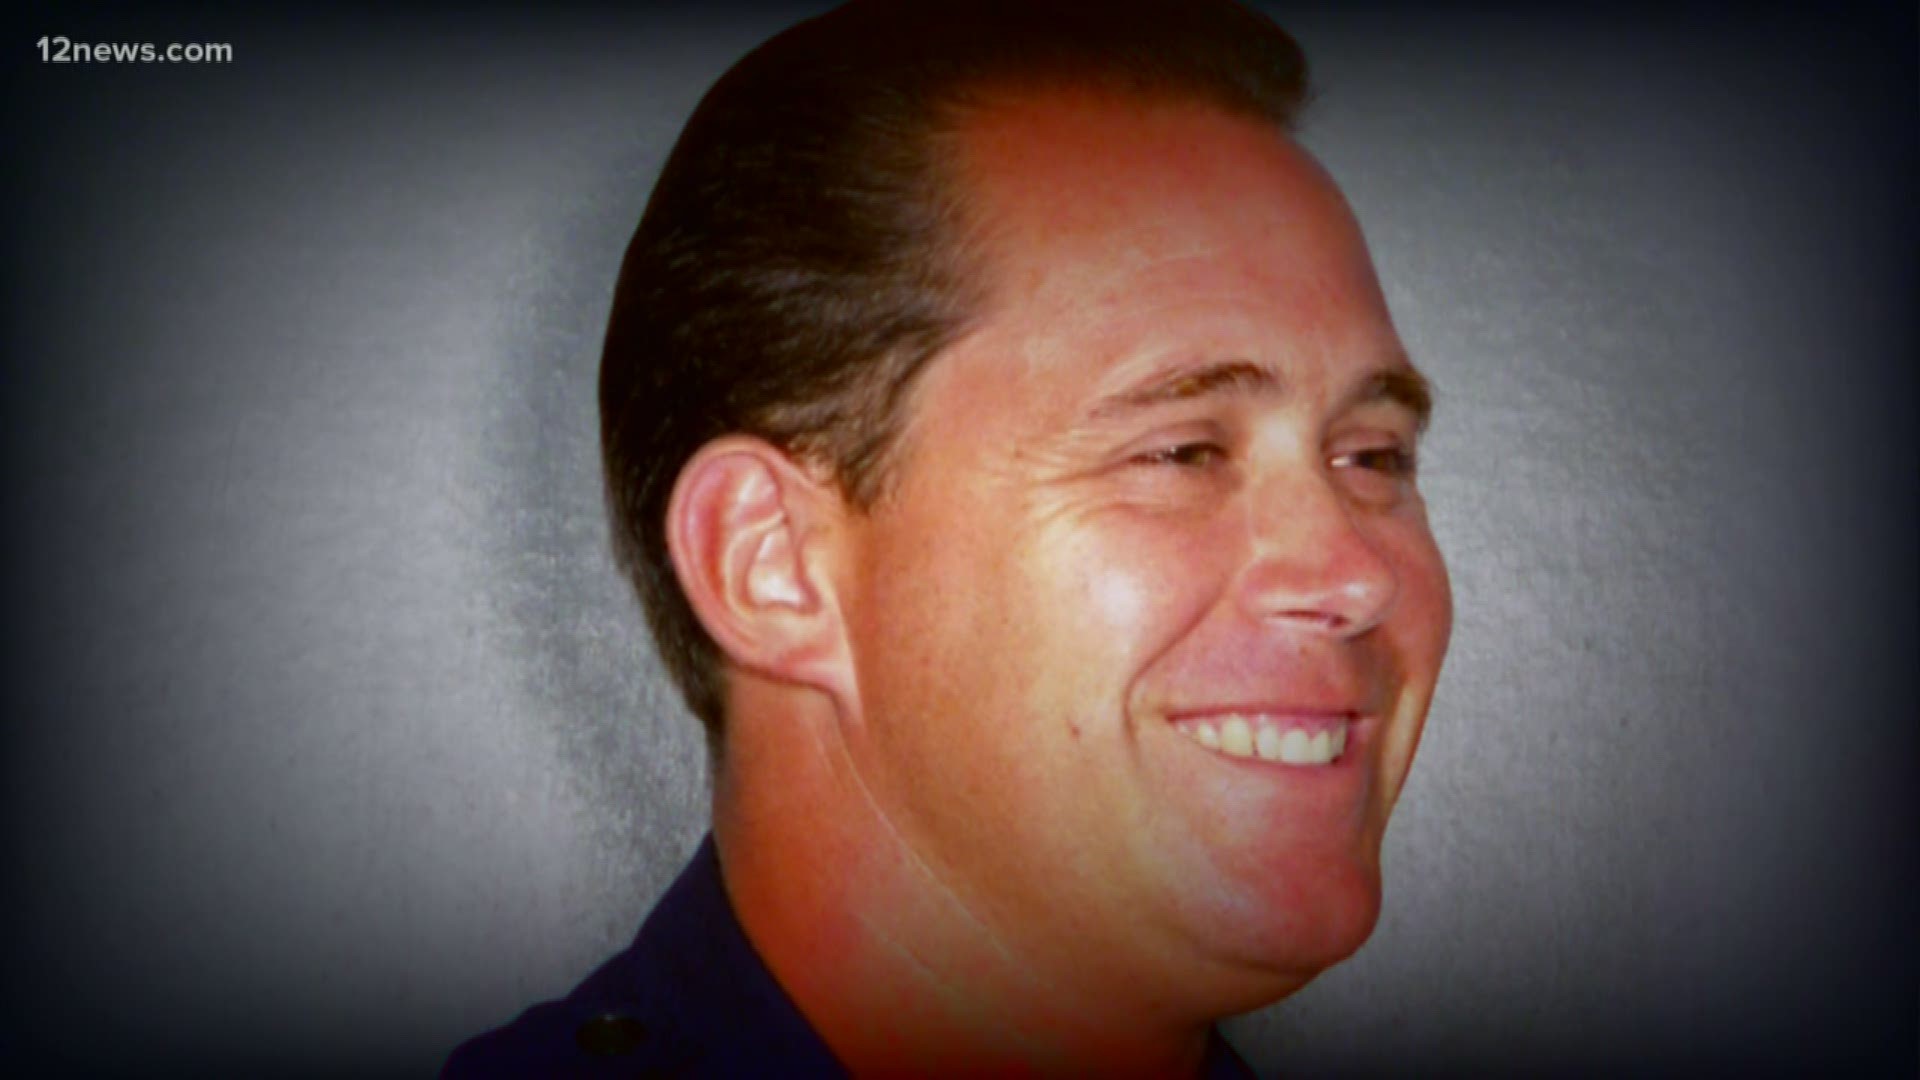 Greg Carnicle was months away from retirement when he was killed in the line of duty. Colleagues mourn the loss of a man who worked on the force for 30 years.